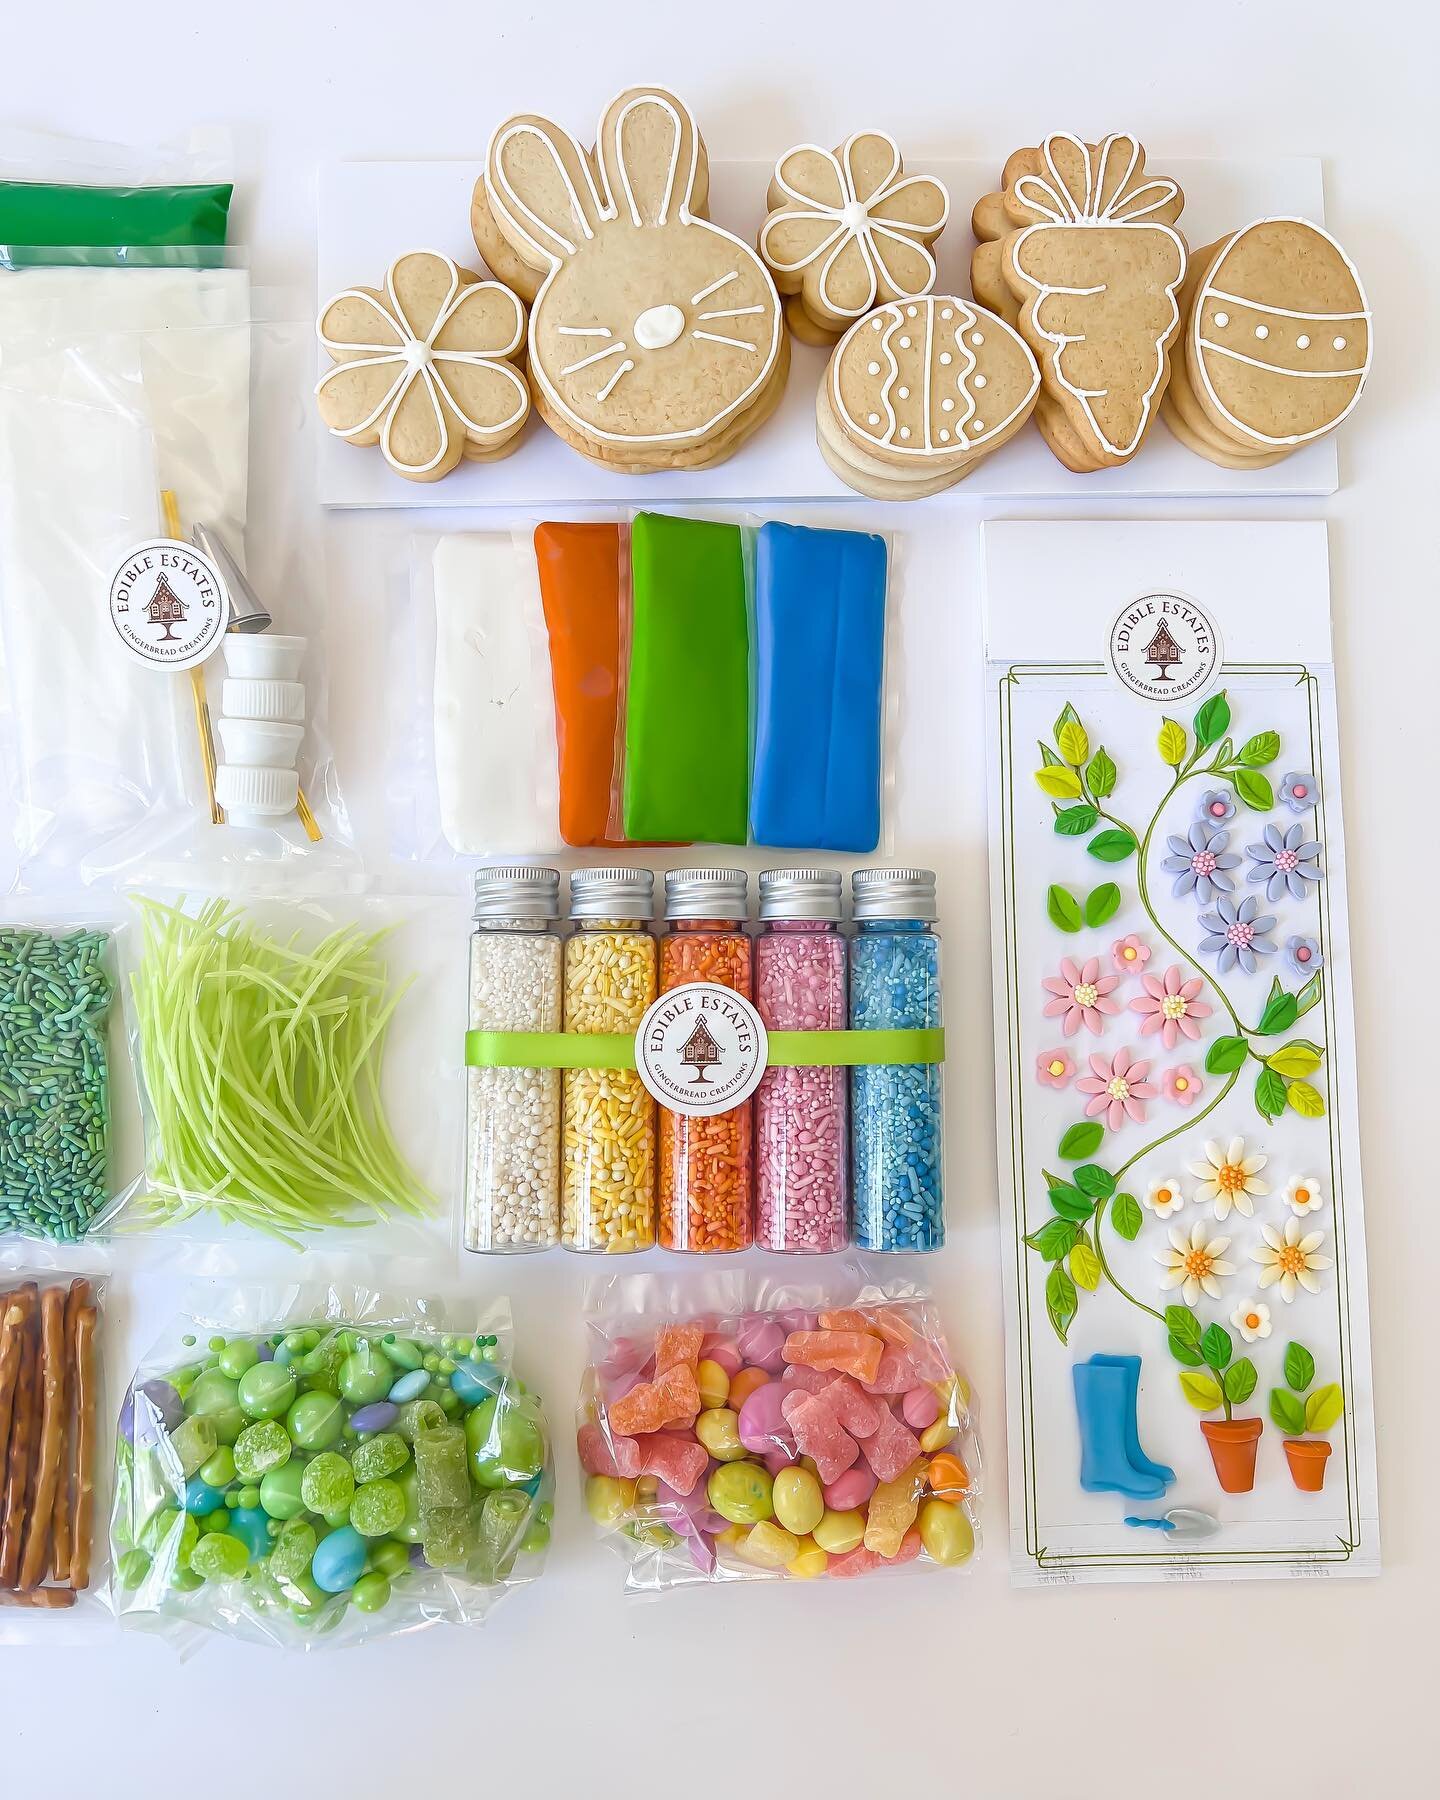 Our new Spring Collection is in full bloom and you don&rsquo;t want to miss it. Shop today www.edibleestates.com⁣
⁣
⁣
⁣
⁣
#edibleestates #gingerbread #cookies #gingerbreadhouse #springdessert #sprinkles #vanillacookies #njfoodie #njdood